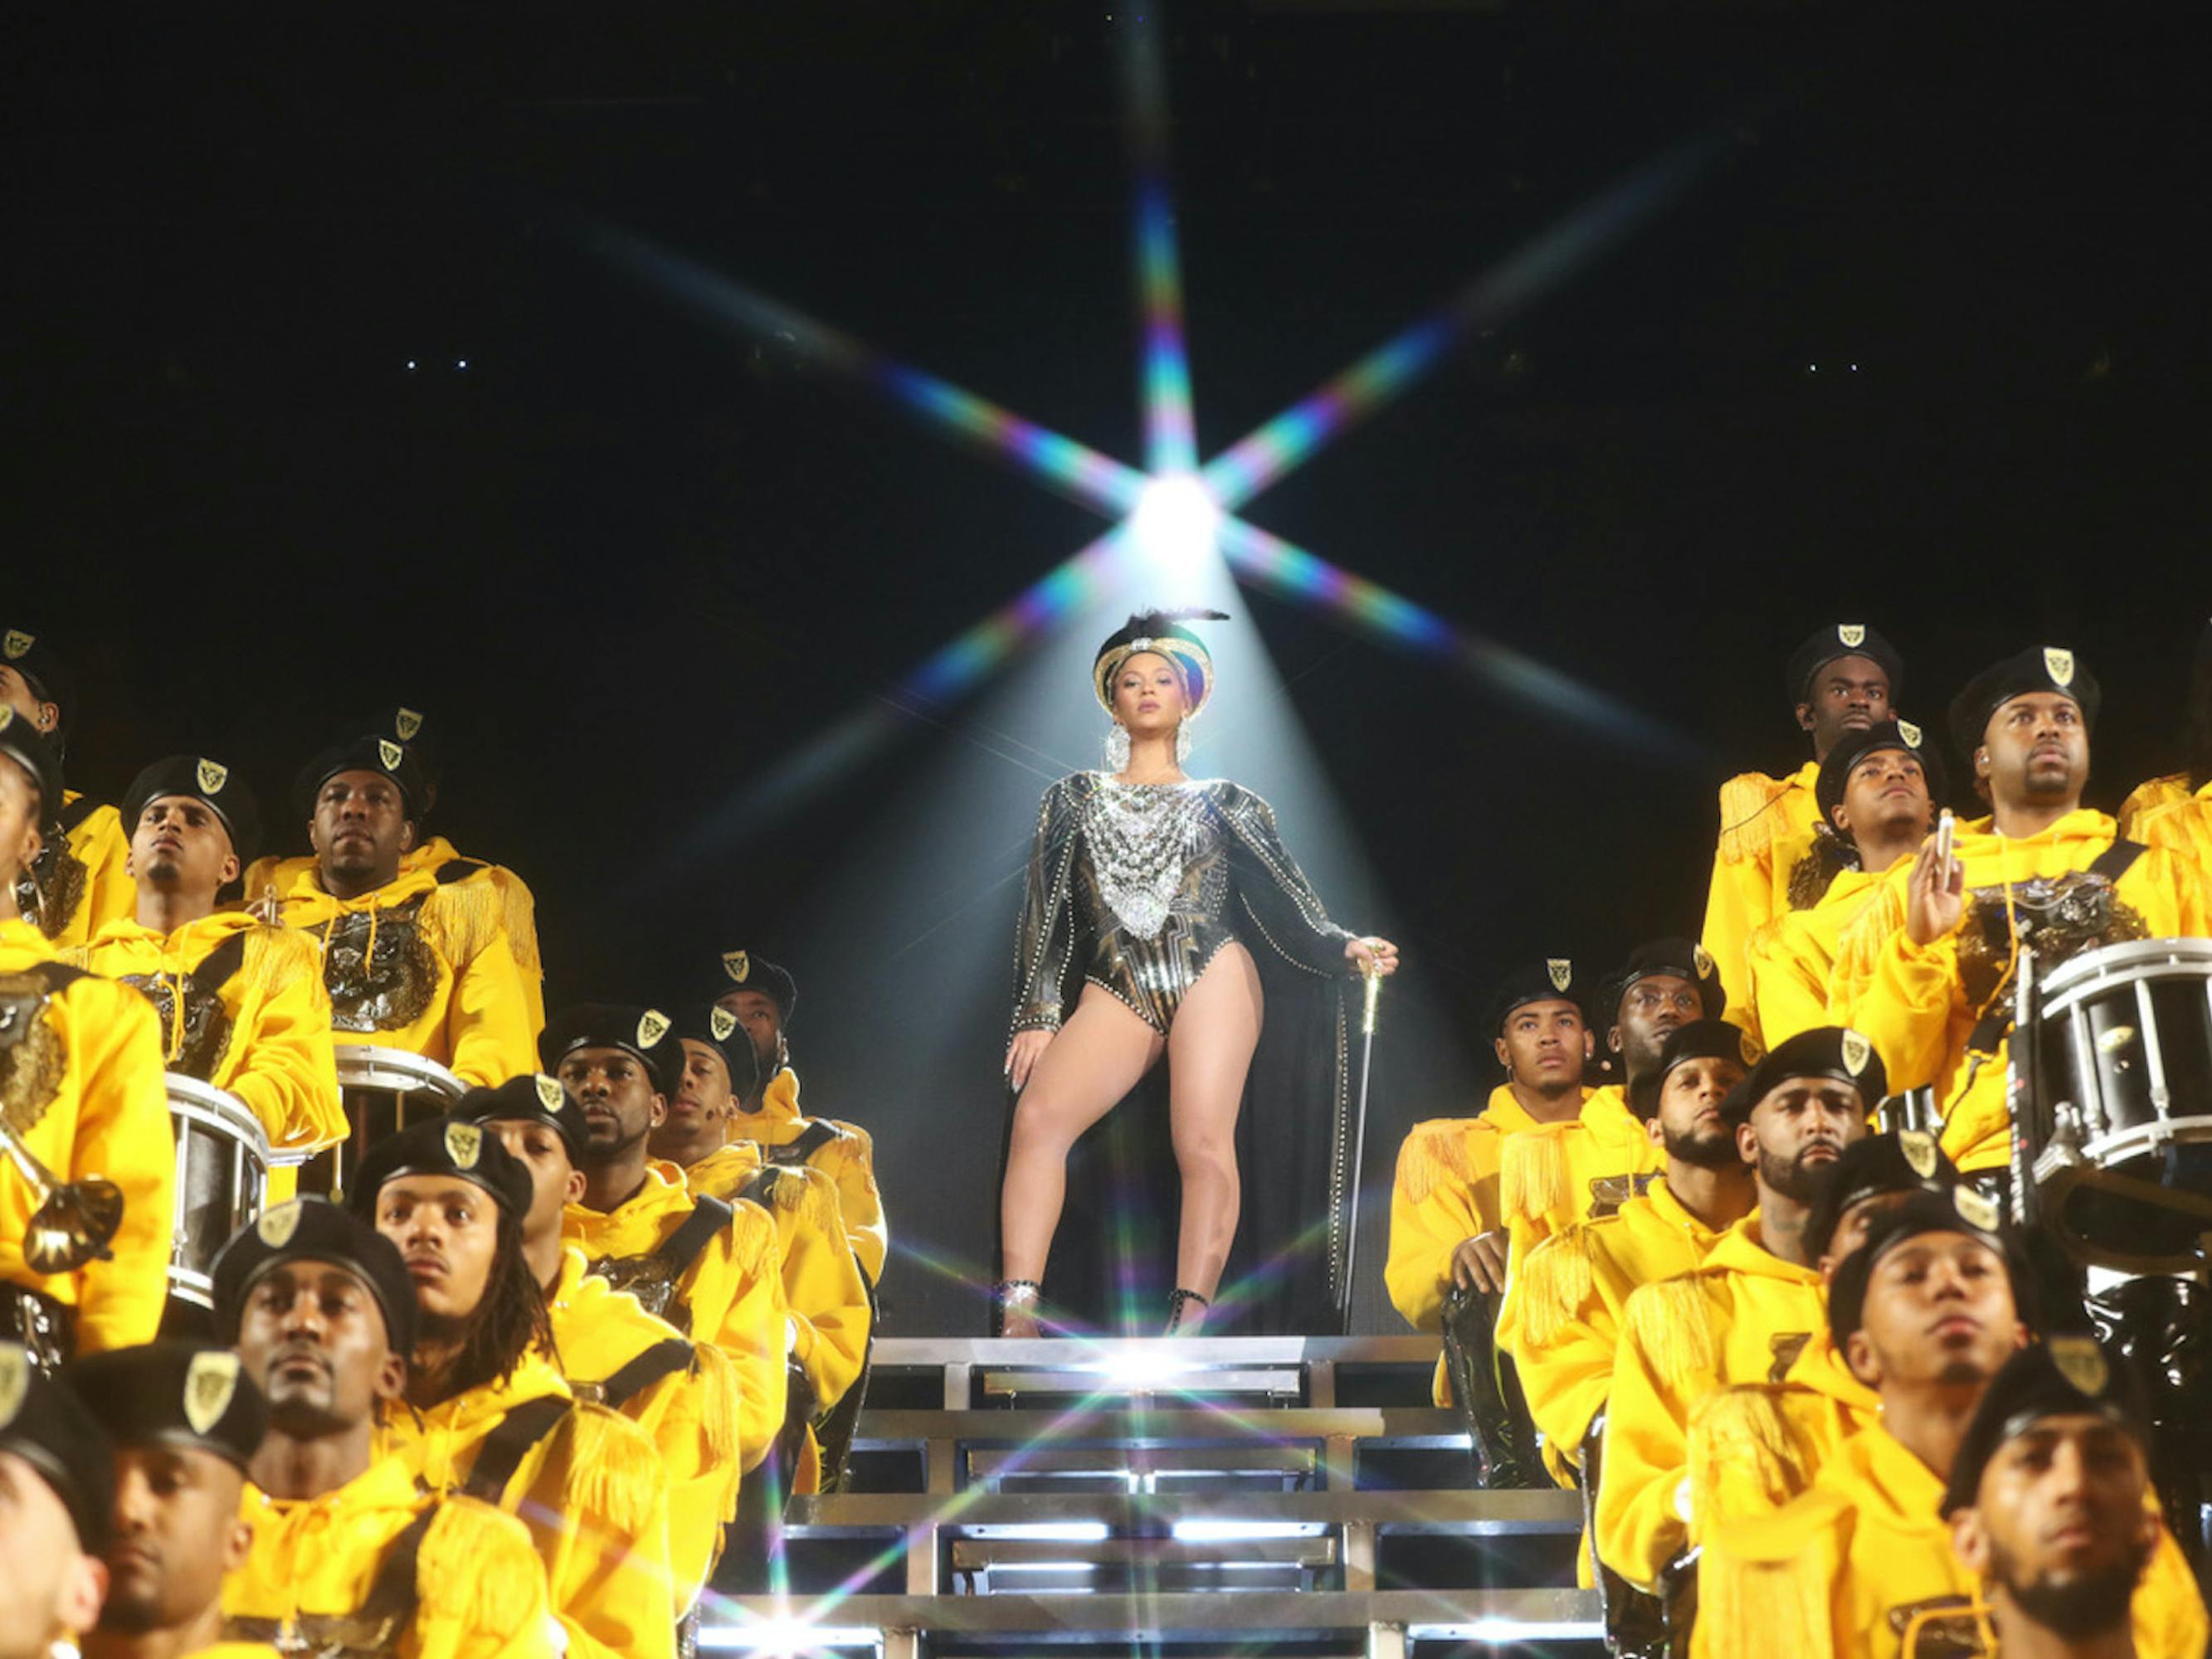 Beyoncé wears a silver leotard and stands amidst a marching band dressed in yellow.